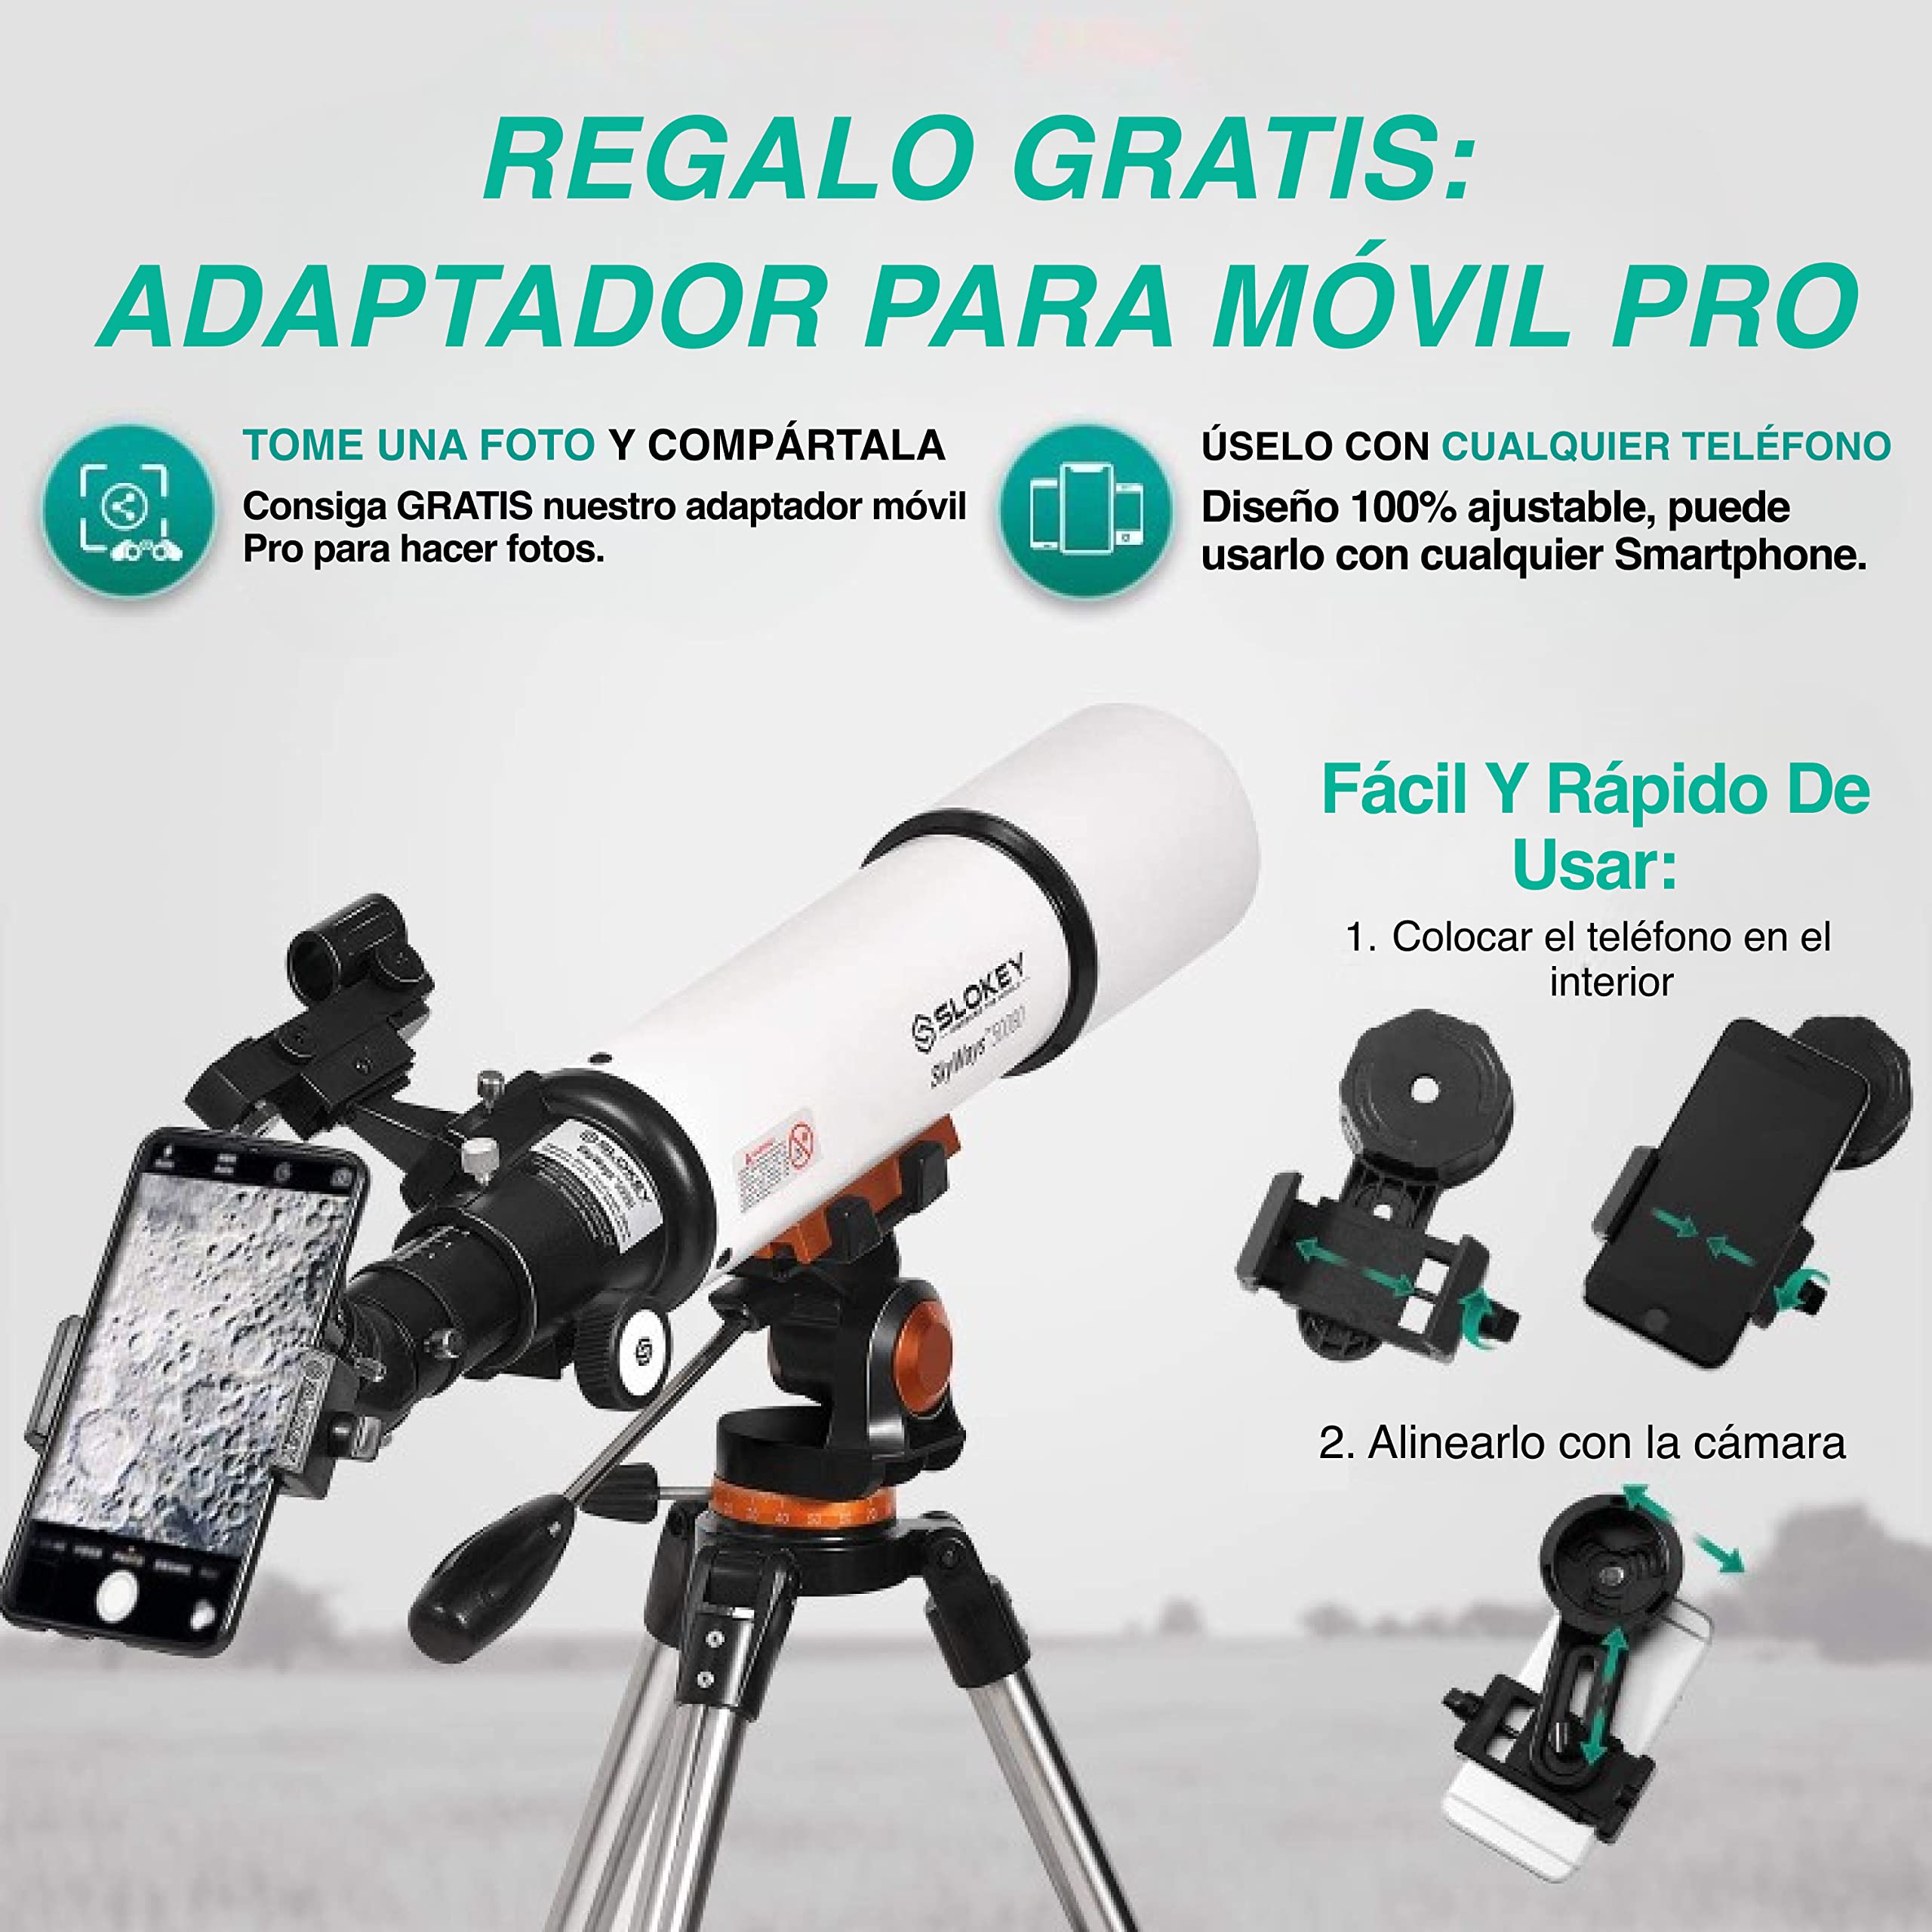 Telescope for Astronomy for Adult Beginners - Profesional, Portable and Powerful 20x-250x - Easy to Mount and Use - Astronomical Telescope for Moon, Planets and Stargazing - Includes a 2-Year Warranty